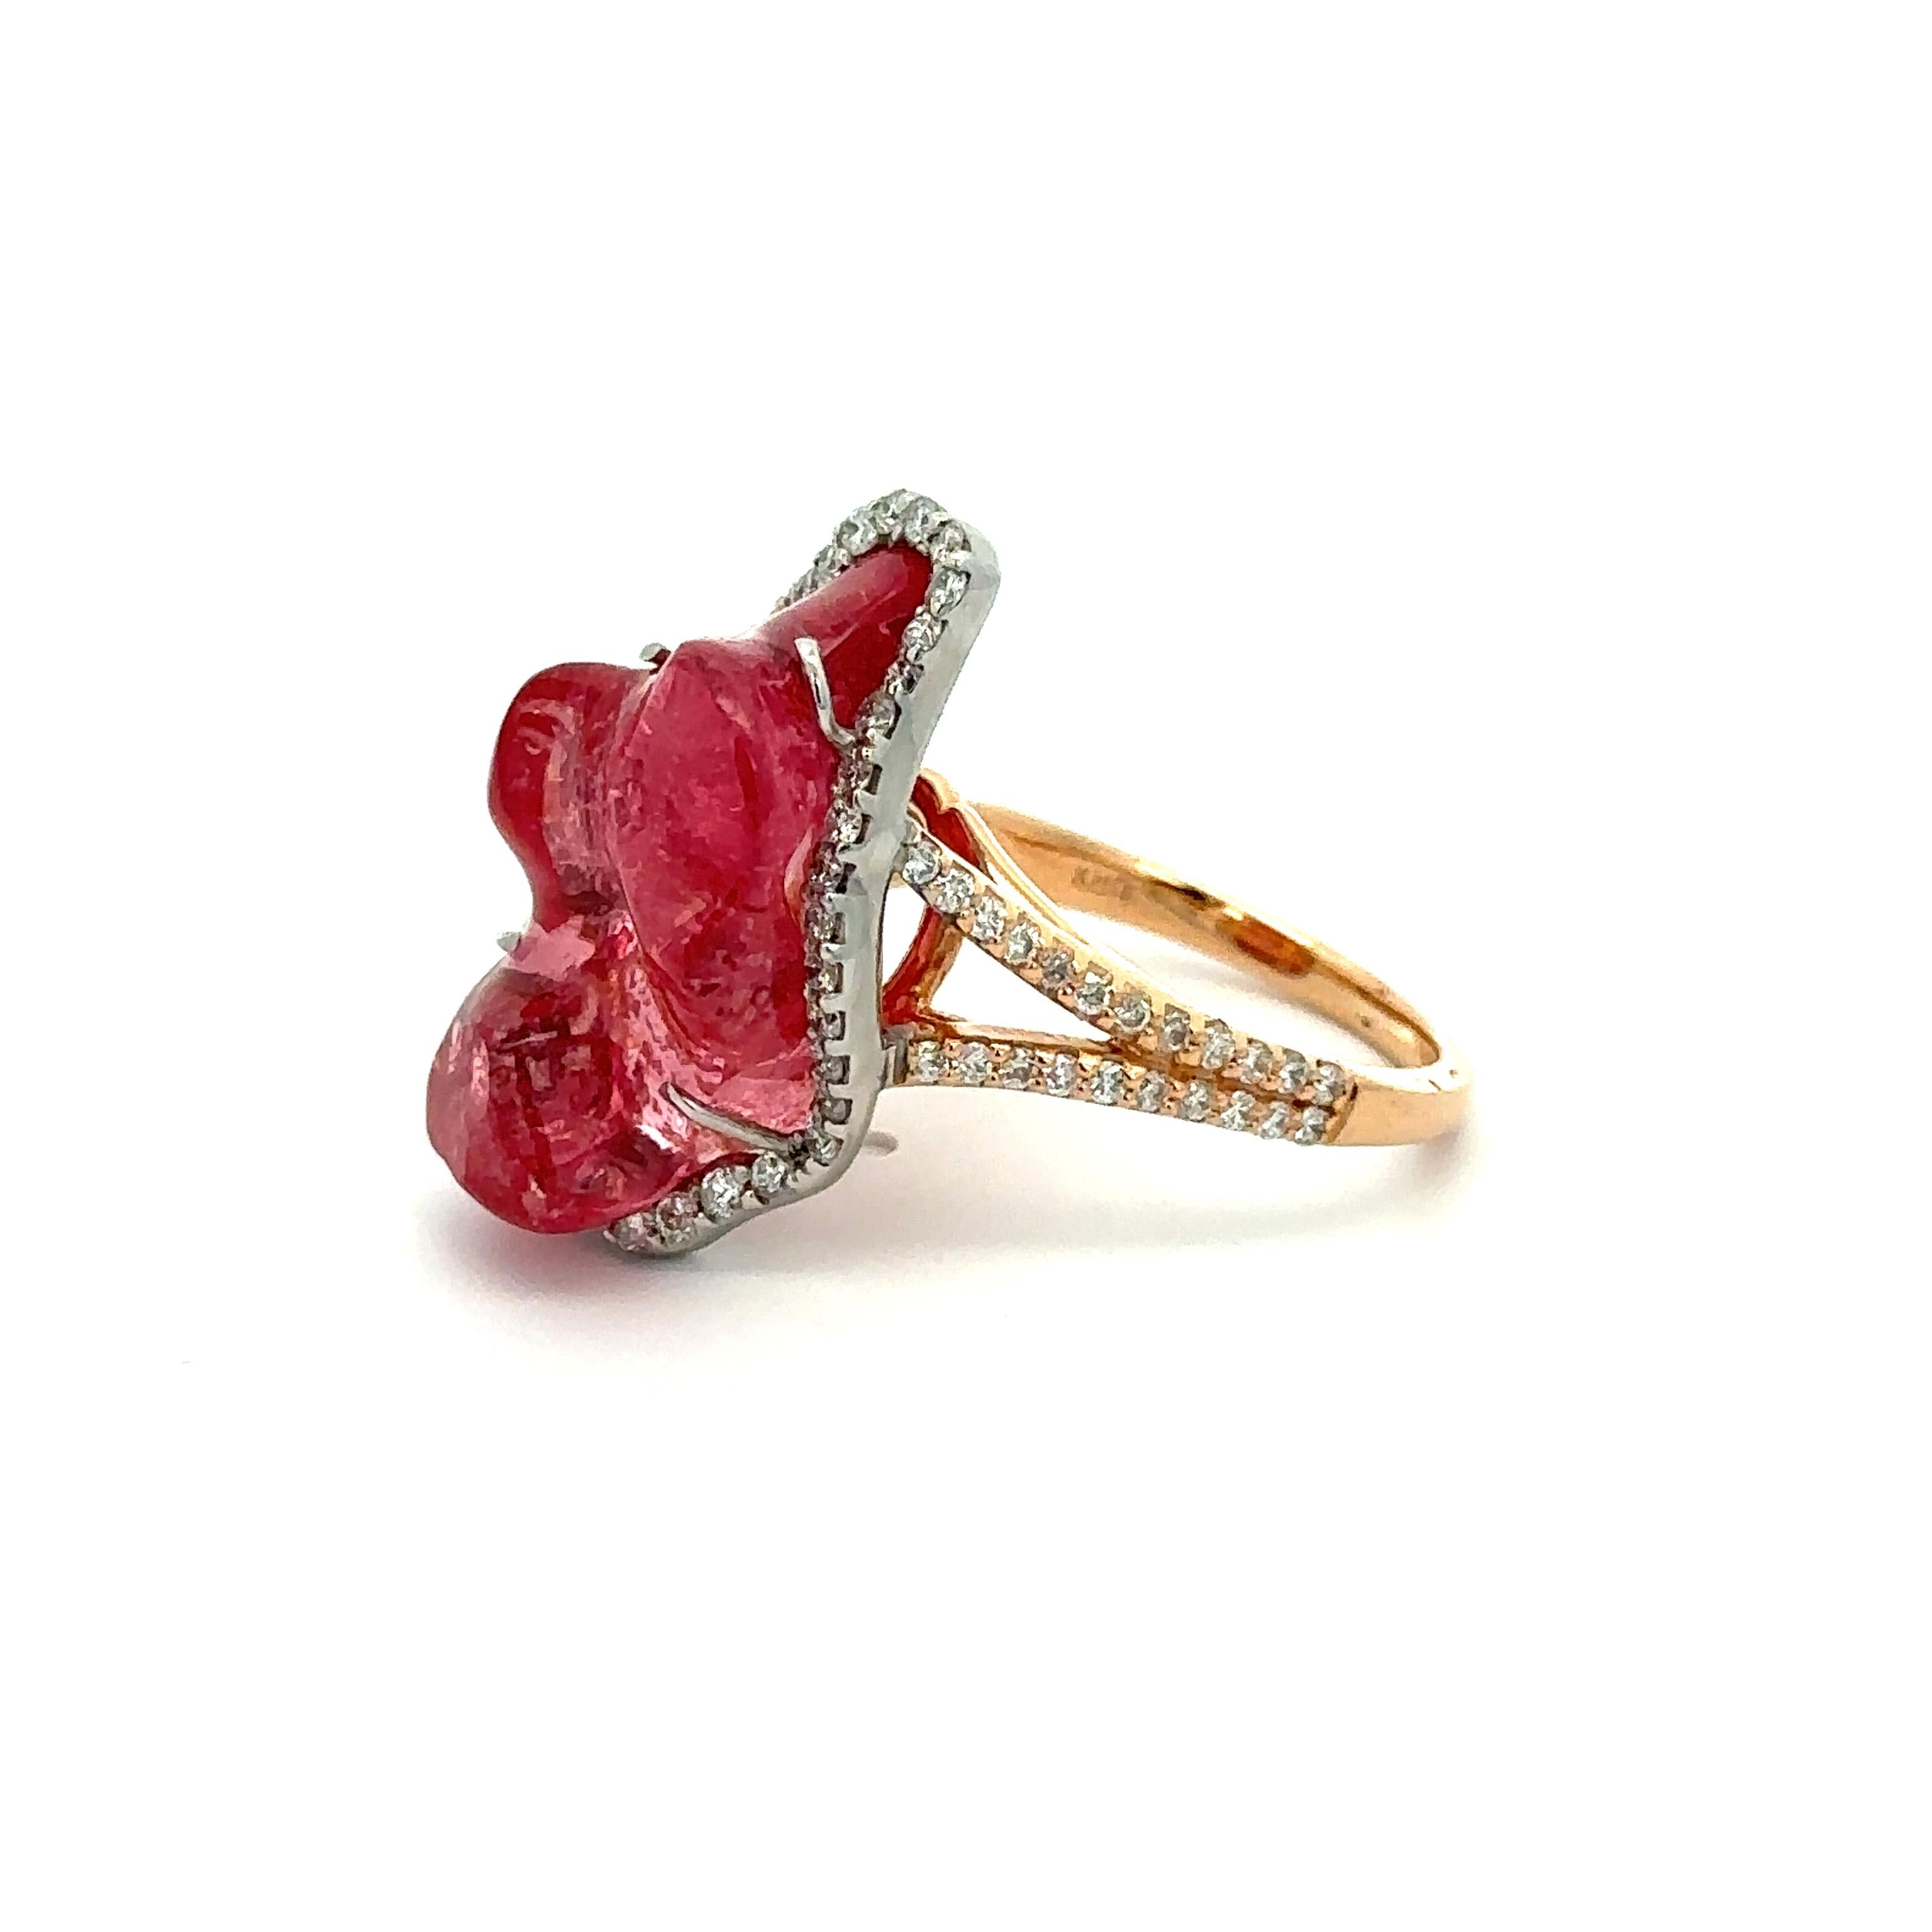 Uncut Kimberly McDonald 18k Gold GIA Orangy Pink Tumbled Free Form Spinel Diamond Ring For Sale